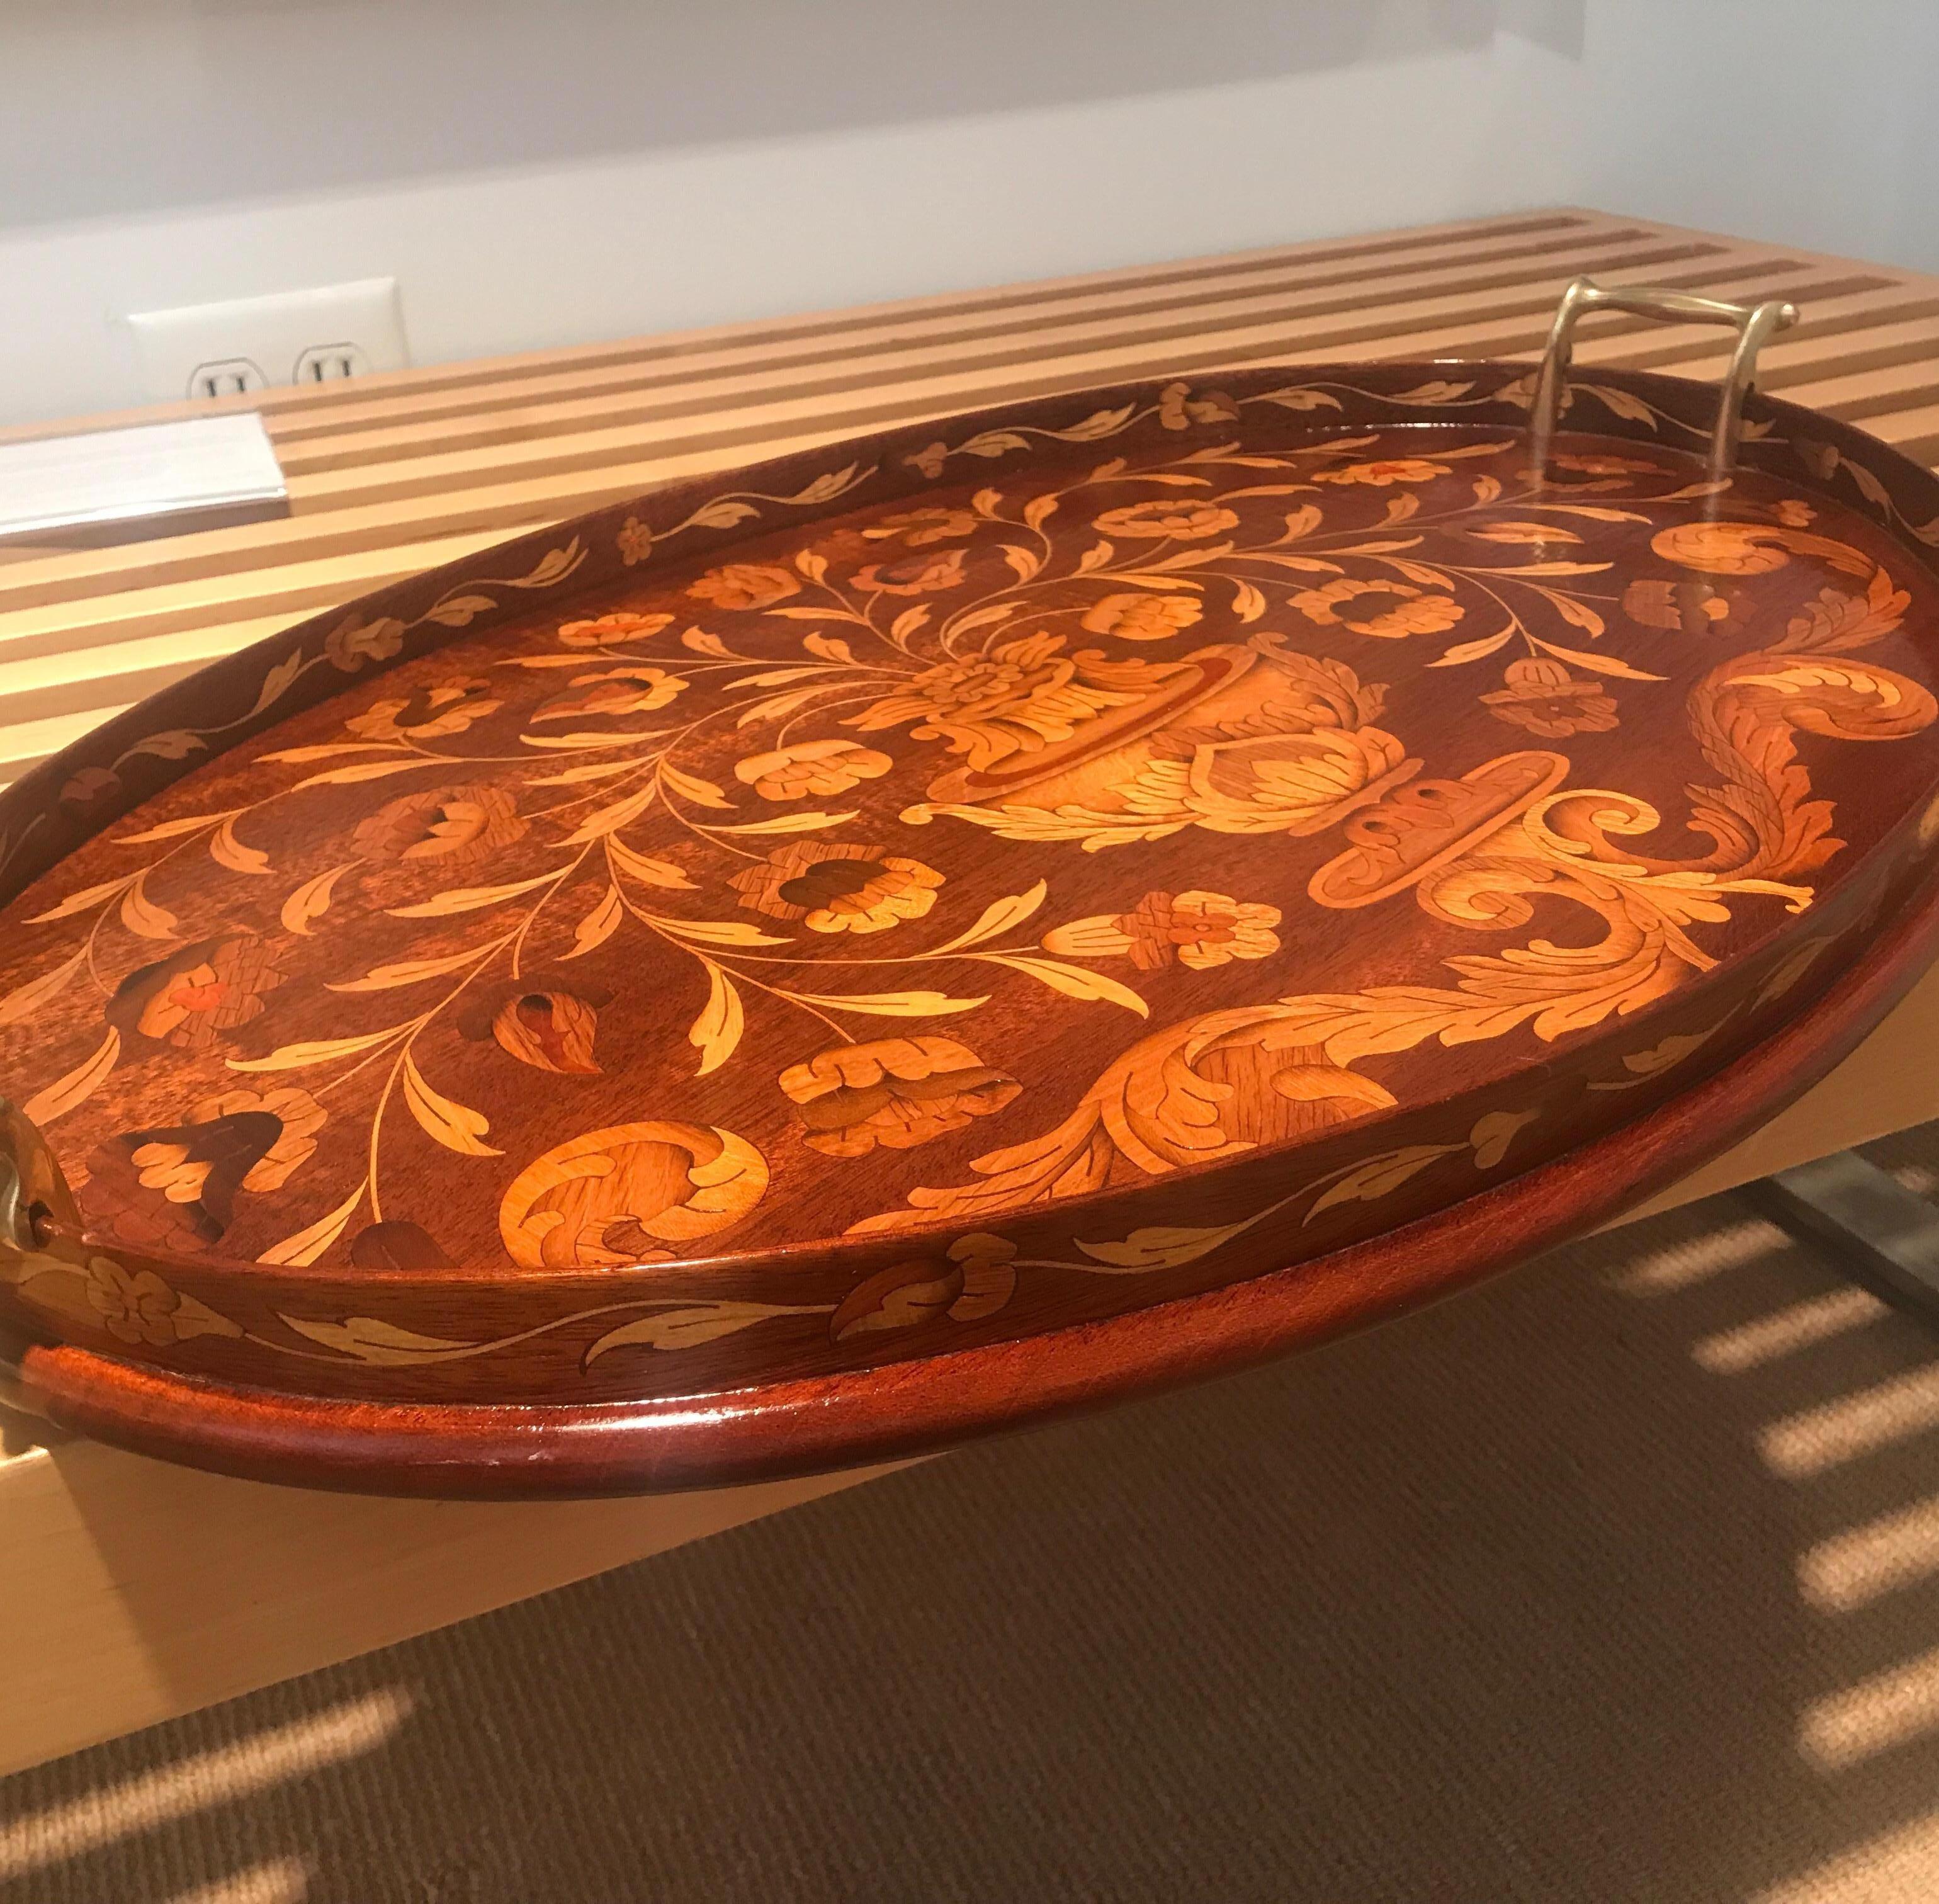 Elegant mahogany tray with elaborate inlays of tulipwood, Kingswood and satinwood. The tray with beautiful inlay all-over the surface, including on the inside and outside of the gallery edge. In excellent condition. Classic English cast brass